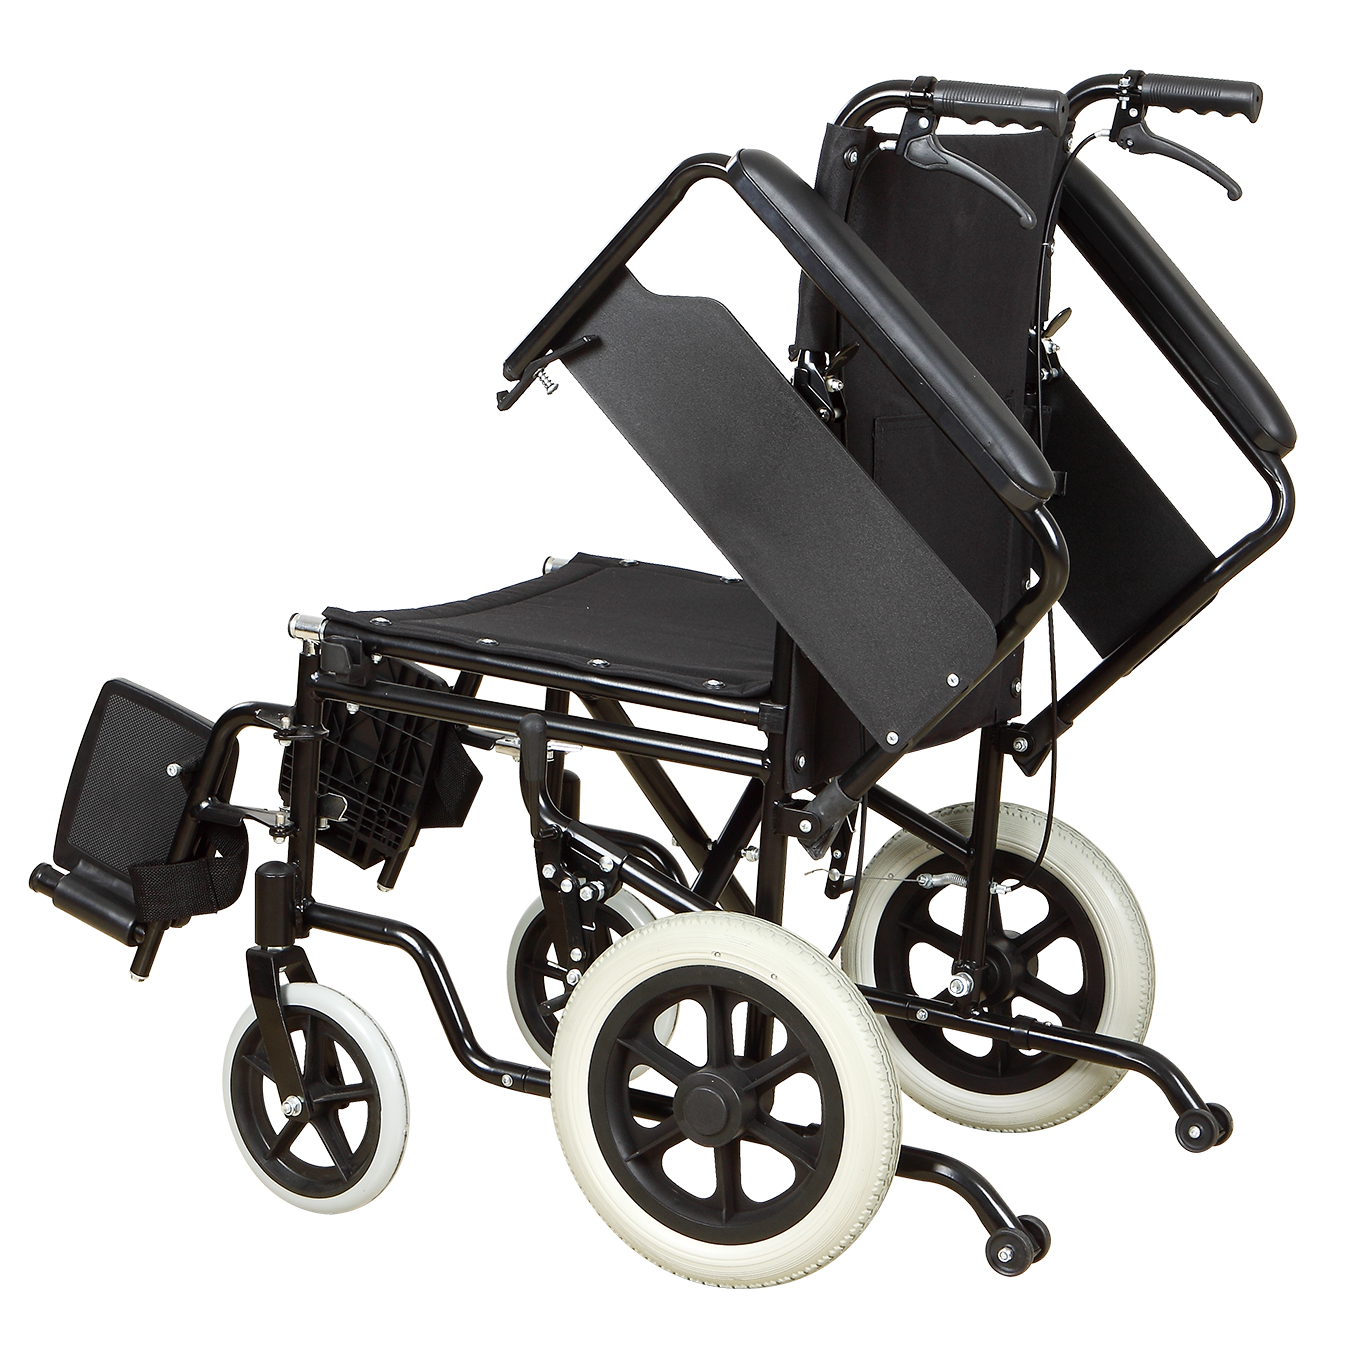 BME 4616 Healthcare Supply folding lightweight travel wheelchair for sale 